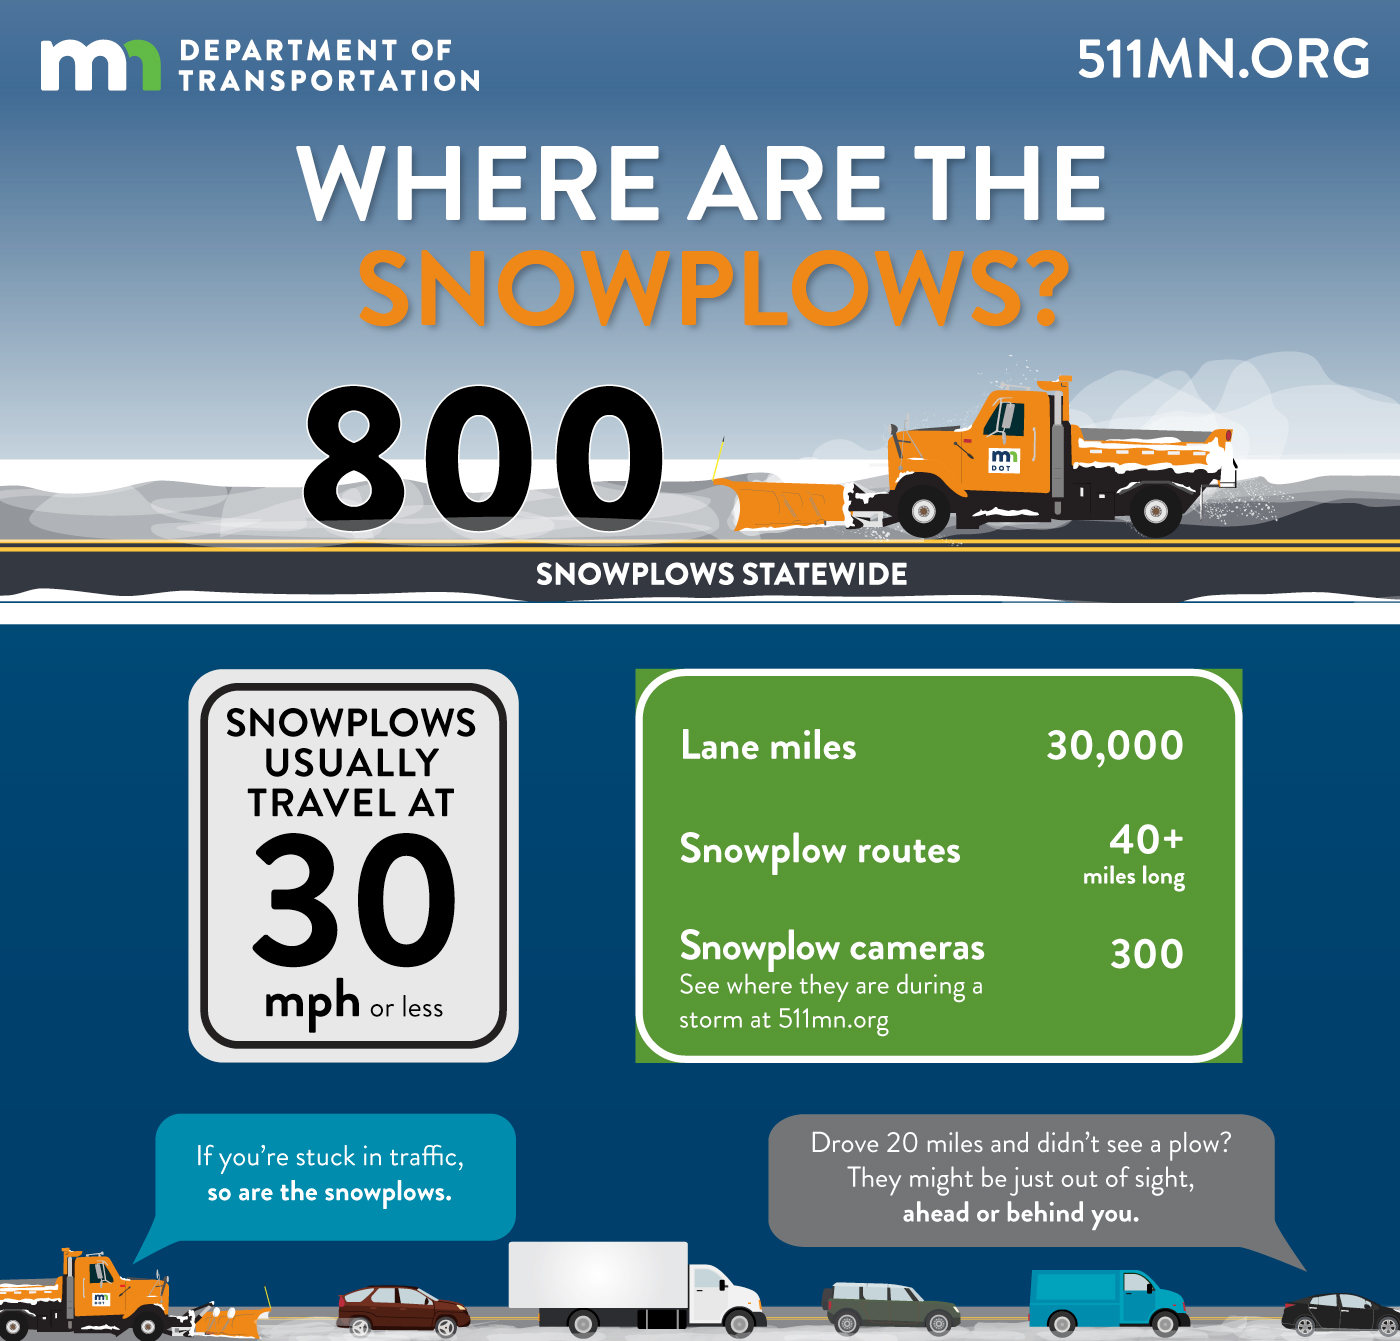 If you are stuck in traffic or drove 20 miles and didn’t see a snowplow, remember snowplows may be just out of site, ahead or behind you